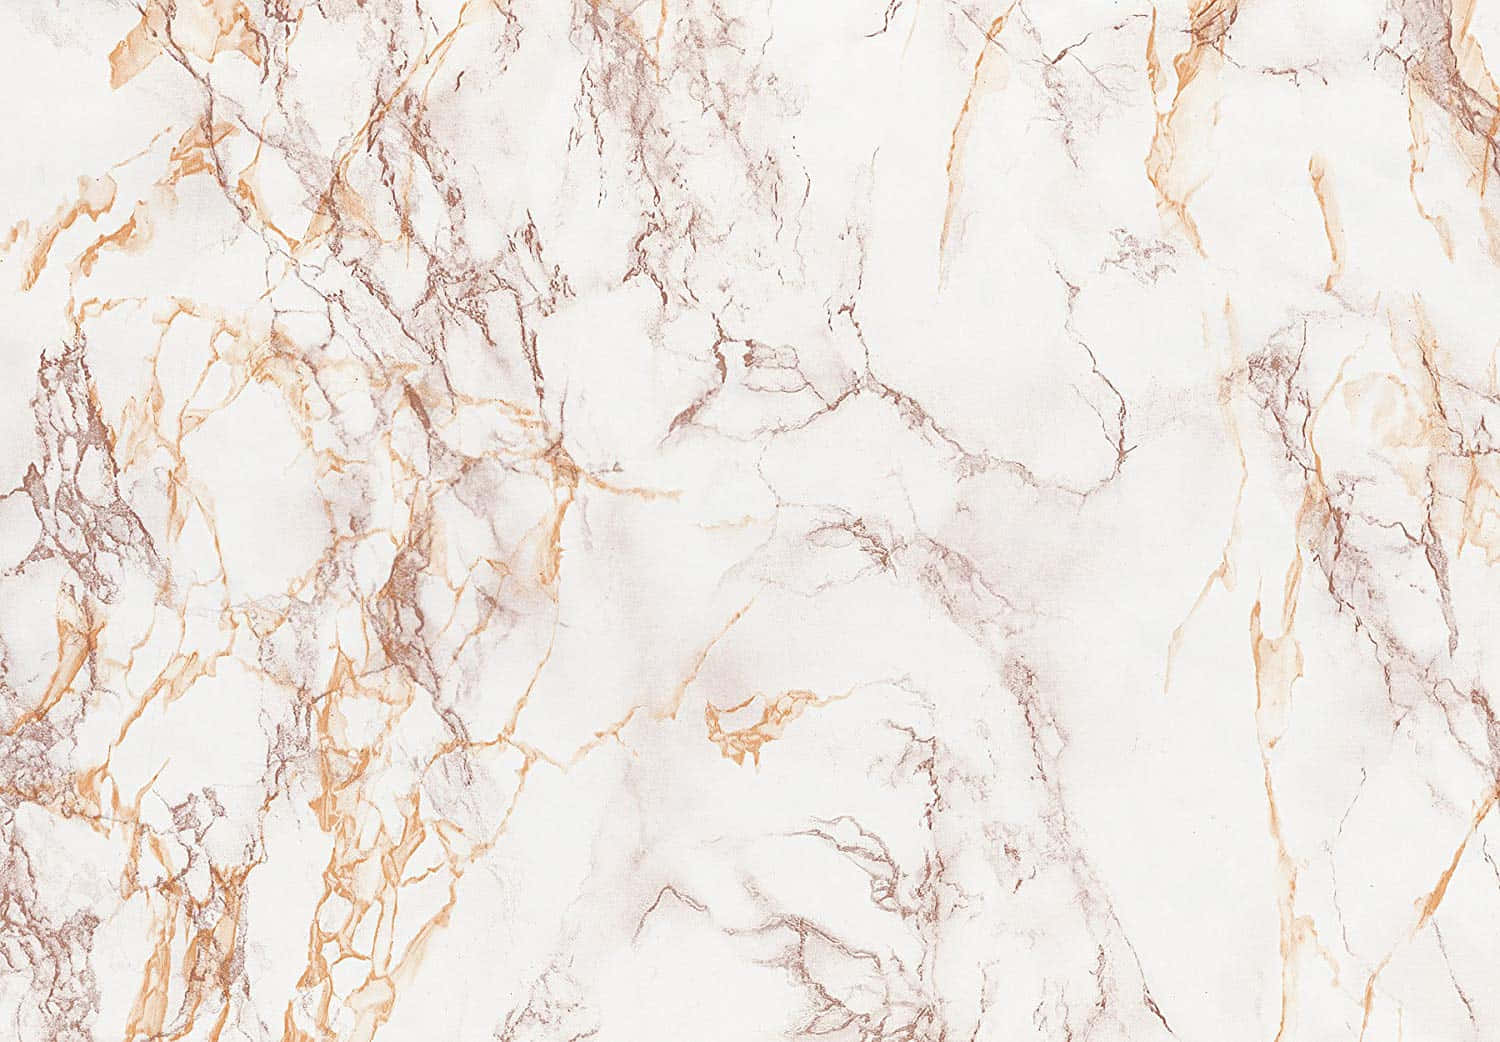 Textured Rose Gold Marble Surface with Subtle Glitter Details